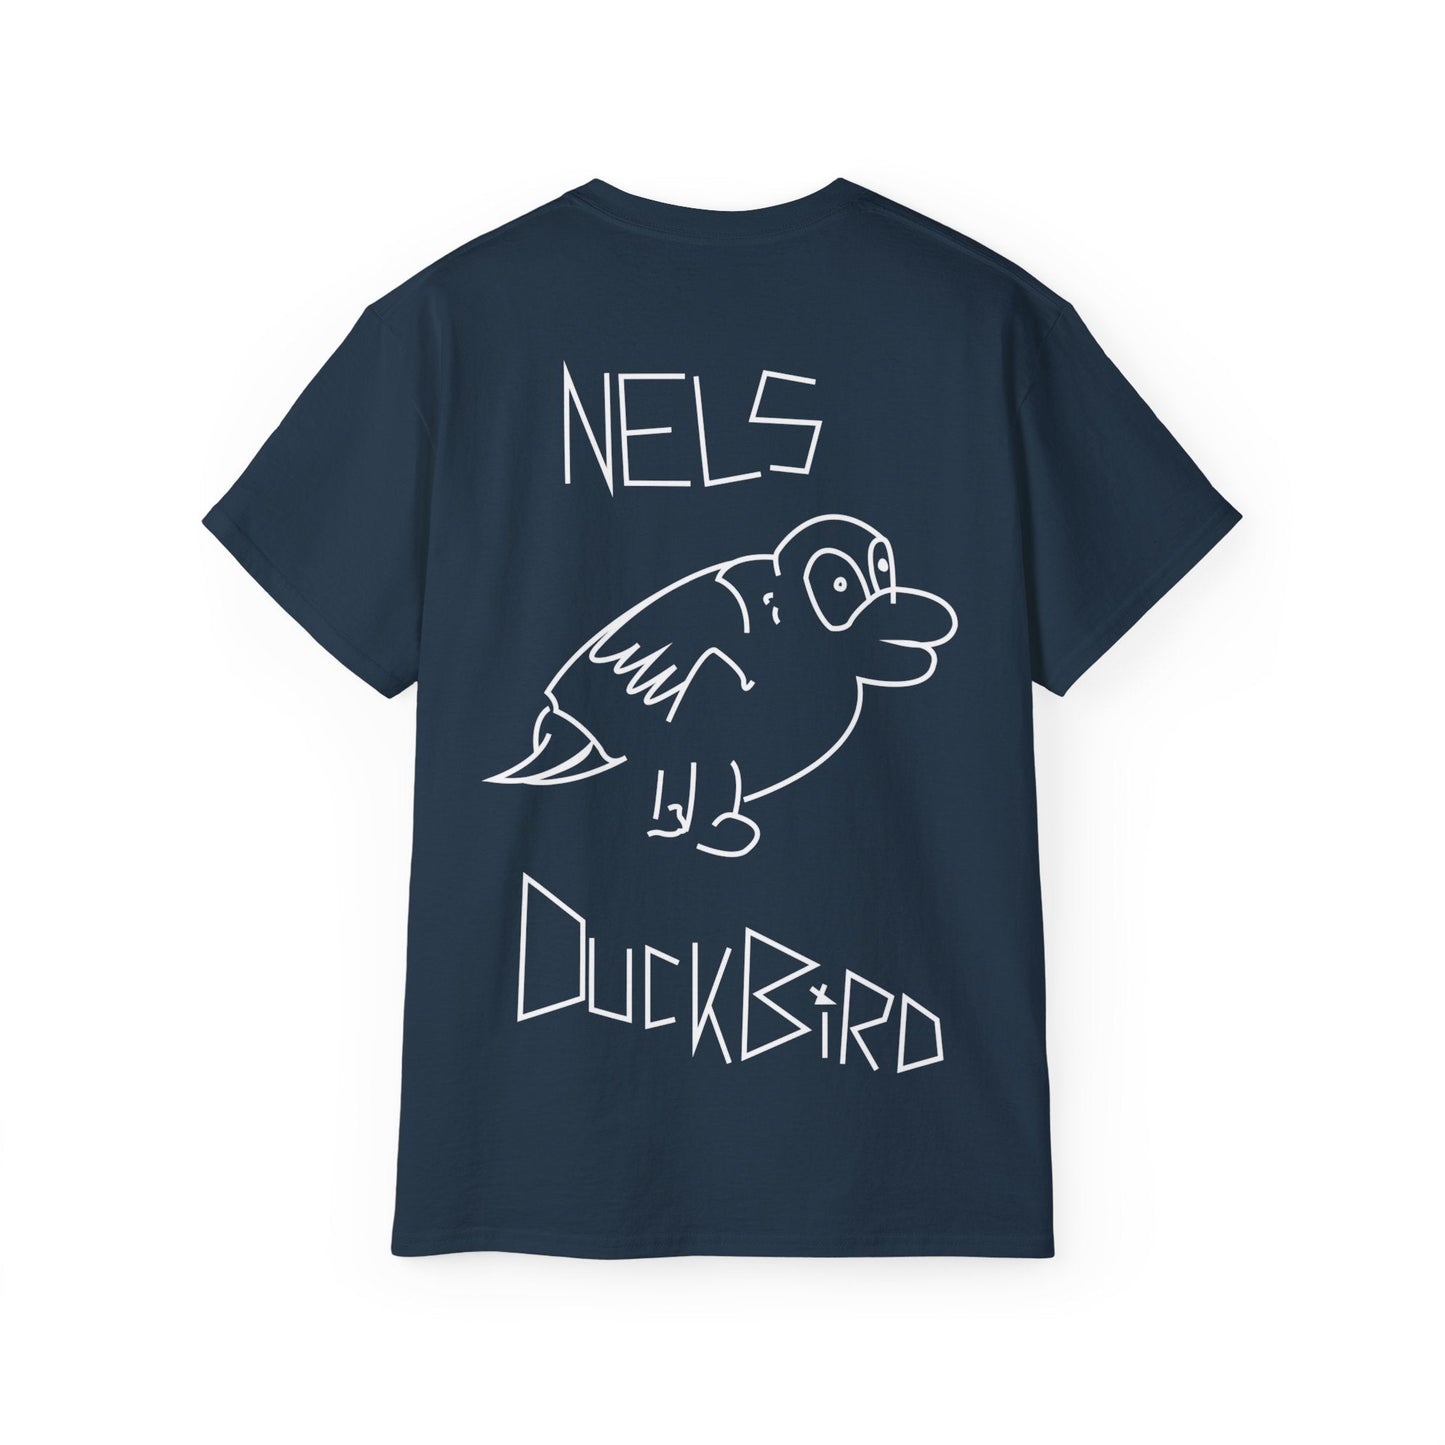 Tee NELS. 'Duckbird' Front and Back - NELS.